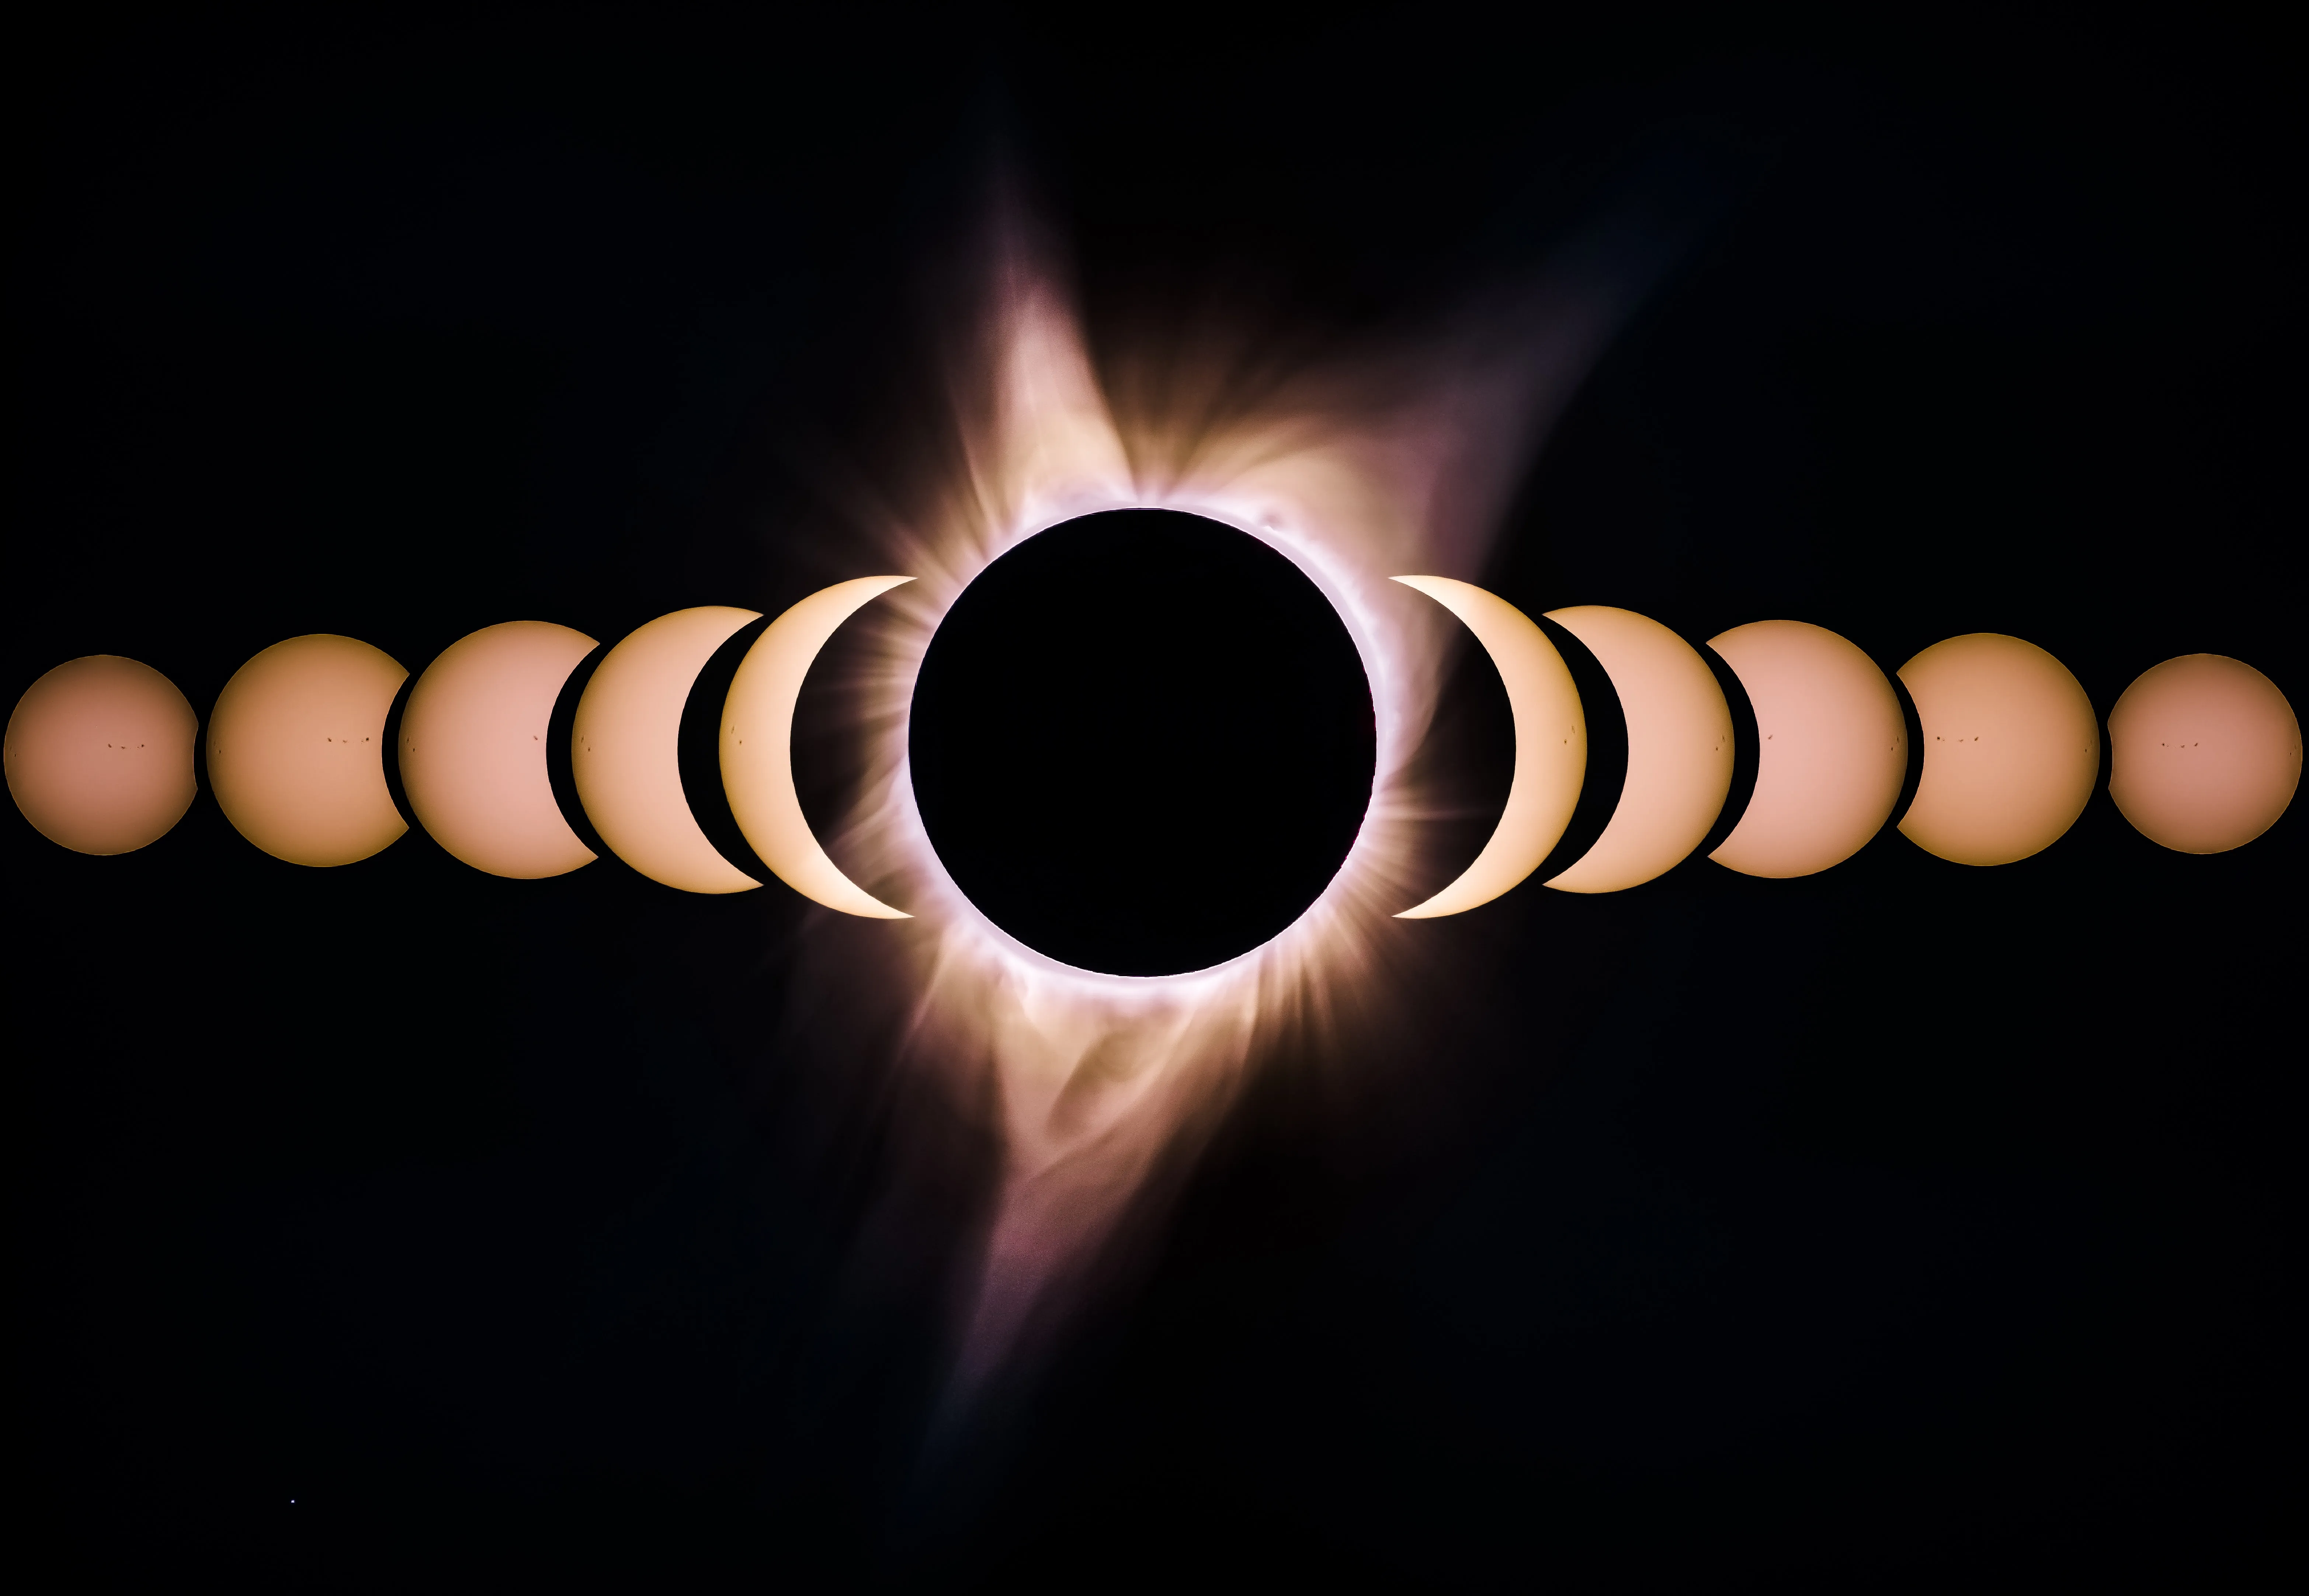 A composite of pictures showing the phases of a solar eclipse